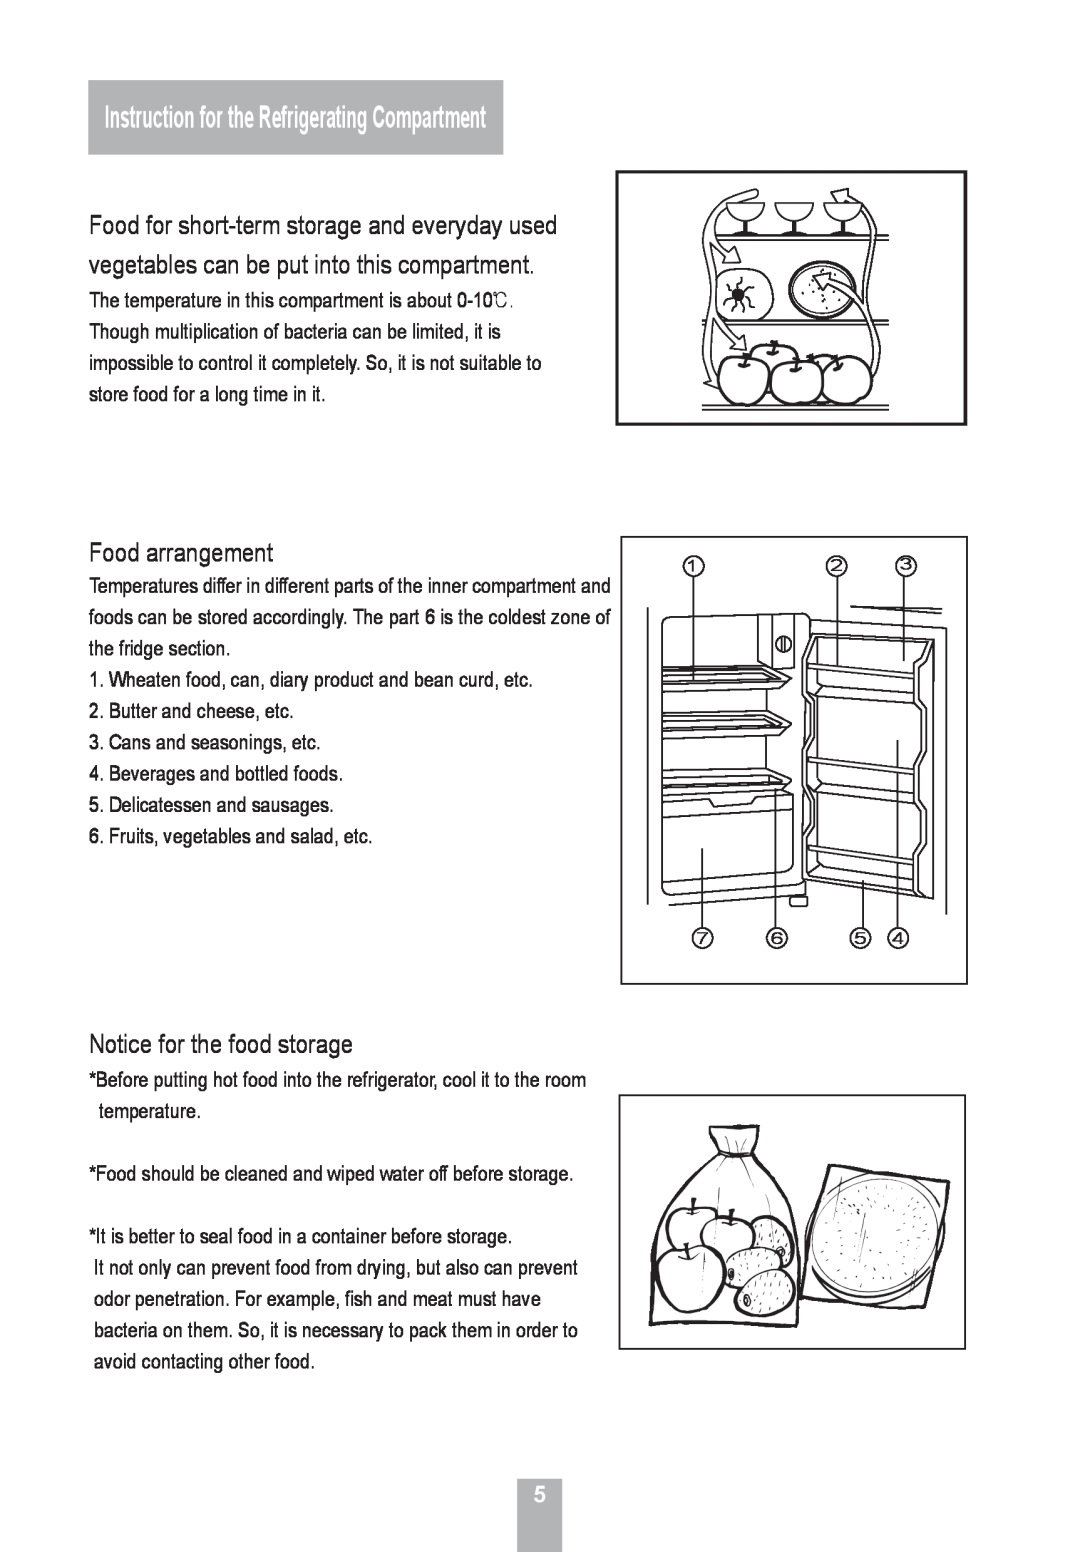 Haier HRF-155, HRF-185 manual Instruction for the Refrigerating Compartment, Food arrangement, Notice for the food storage 